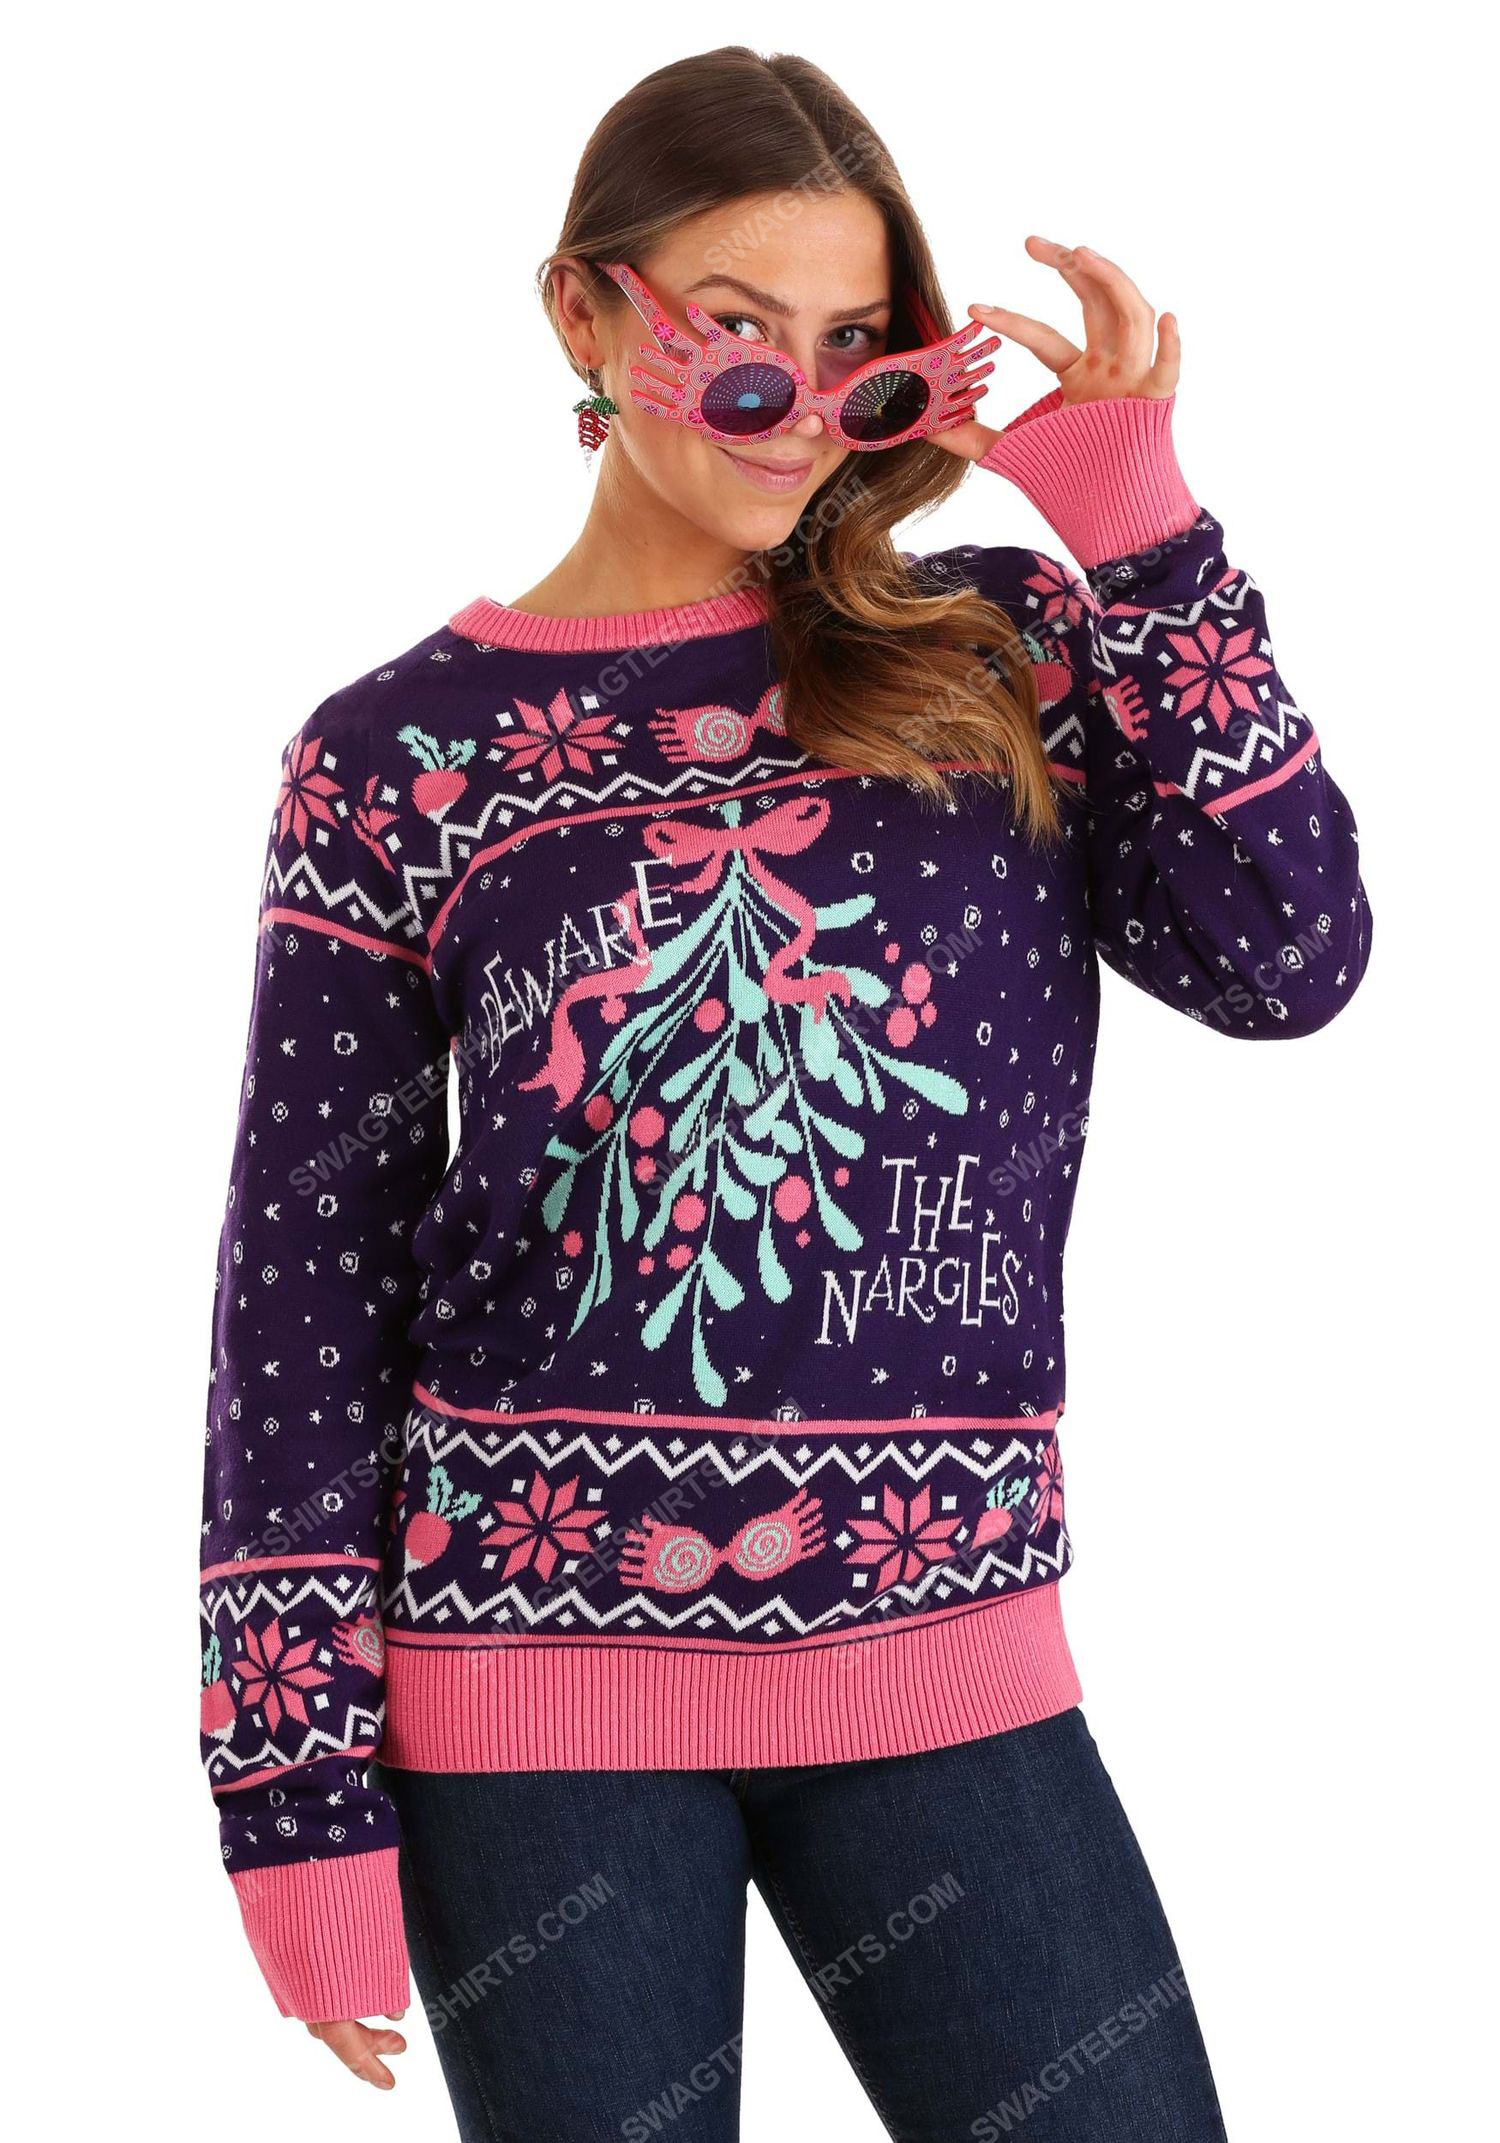 [special edition] Christmas holiday harry potter luna lovegood full print ugly christmas sweater – maria